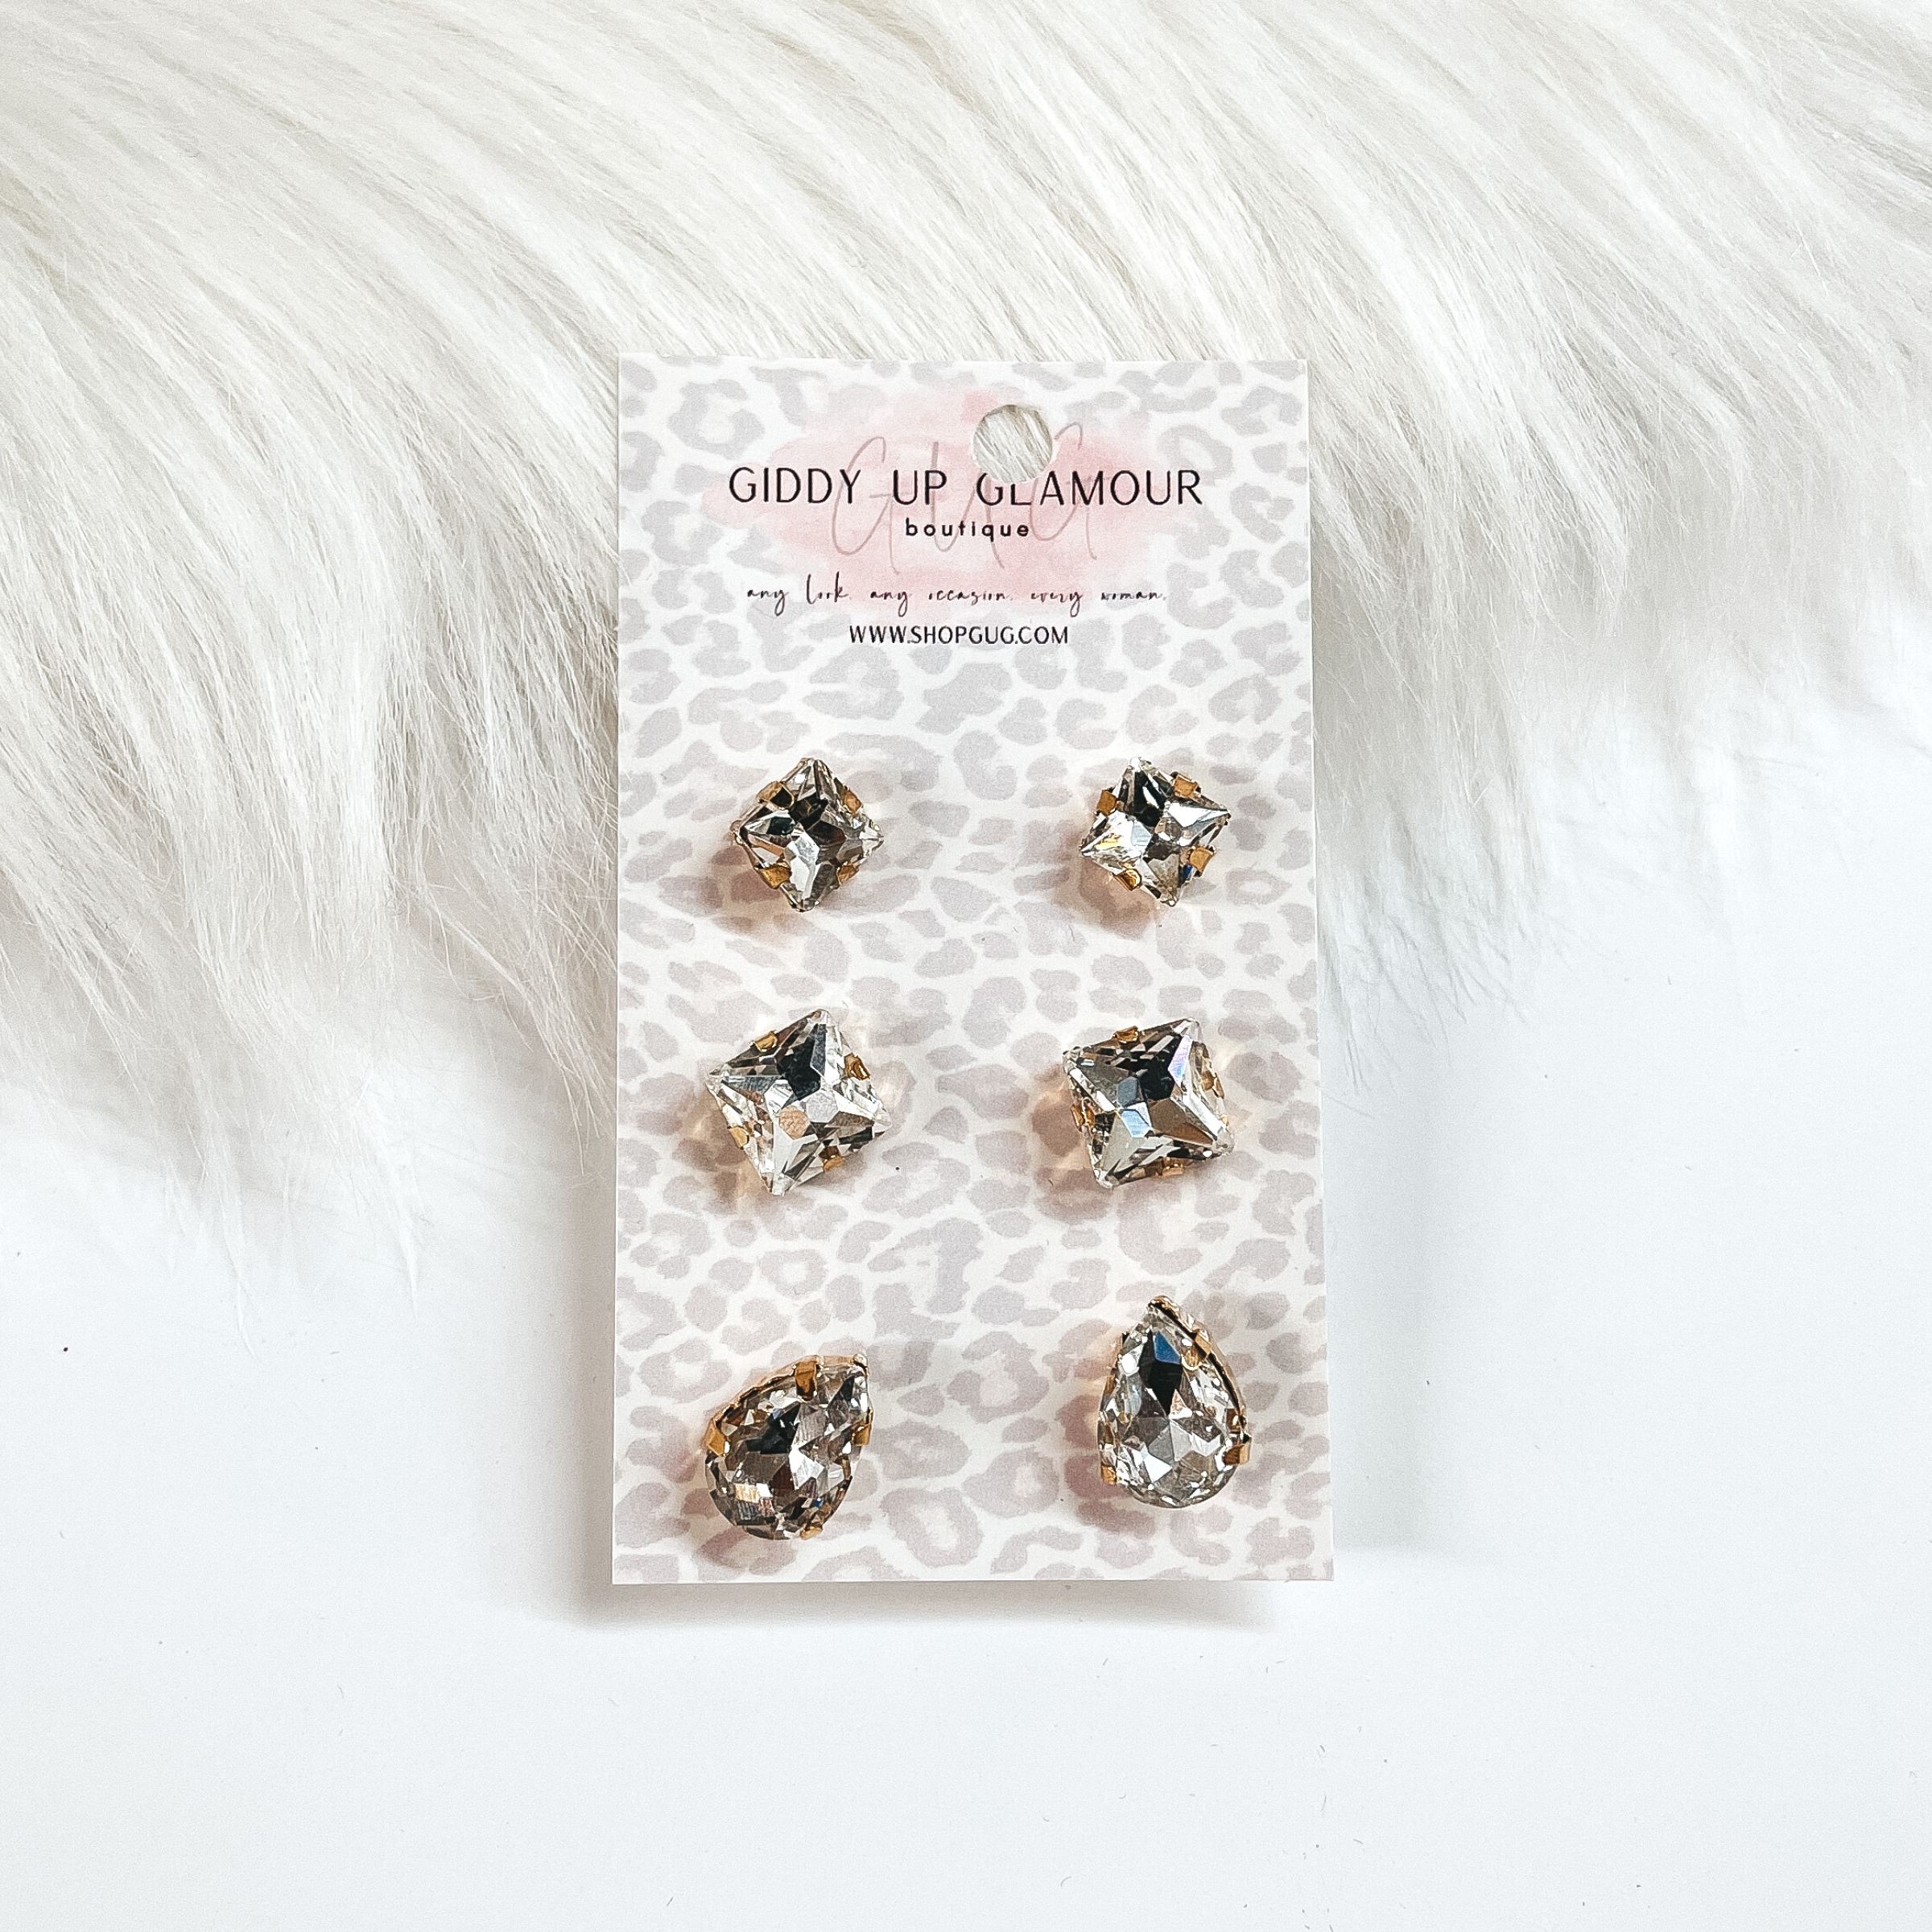 Buy 3 for $10 | Set of Three | Faux Crystal Stud Earrings in Gold Tone Setting - Giddy Up Glamour Boutique